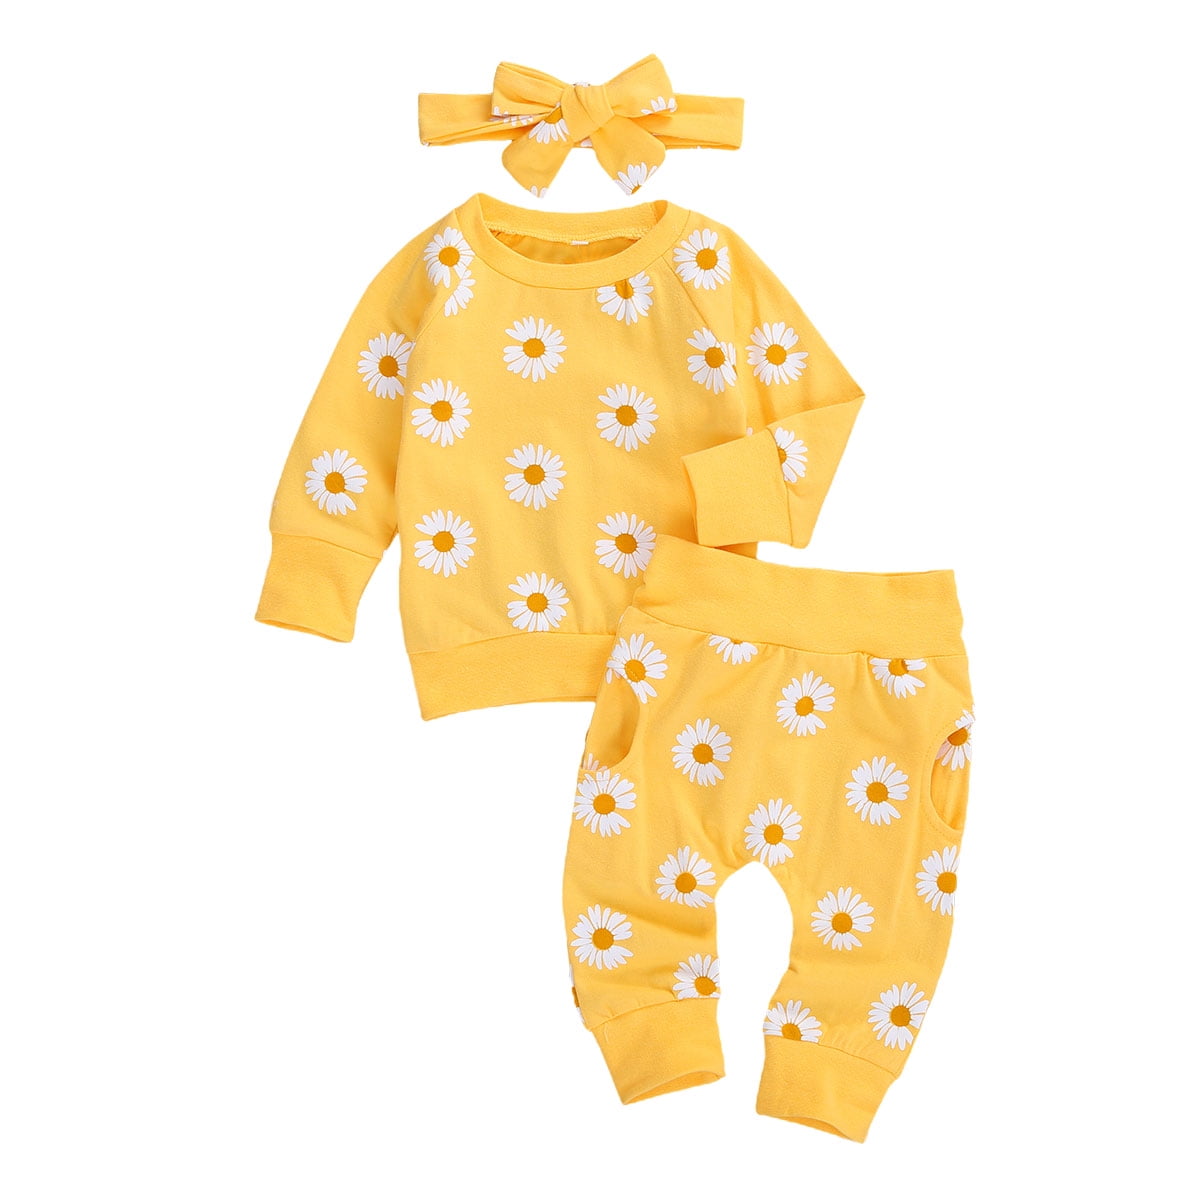 Newborn Infant Baby Girl Clothes Outfits Fall Winter Long Sleeve Sweatshirts Pants Cute Baby Girl Outfits Set